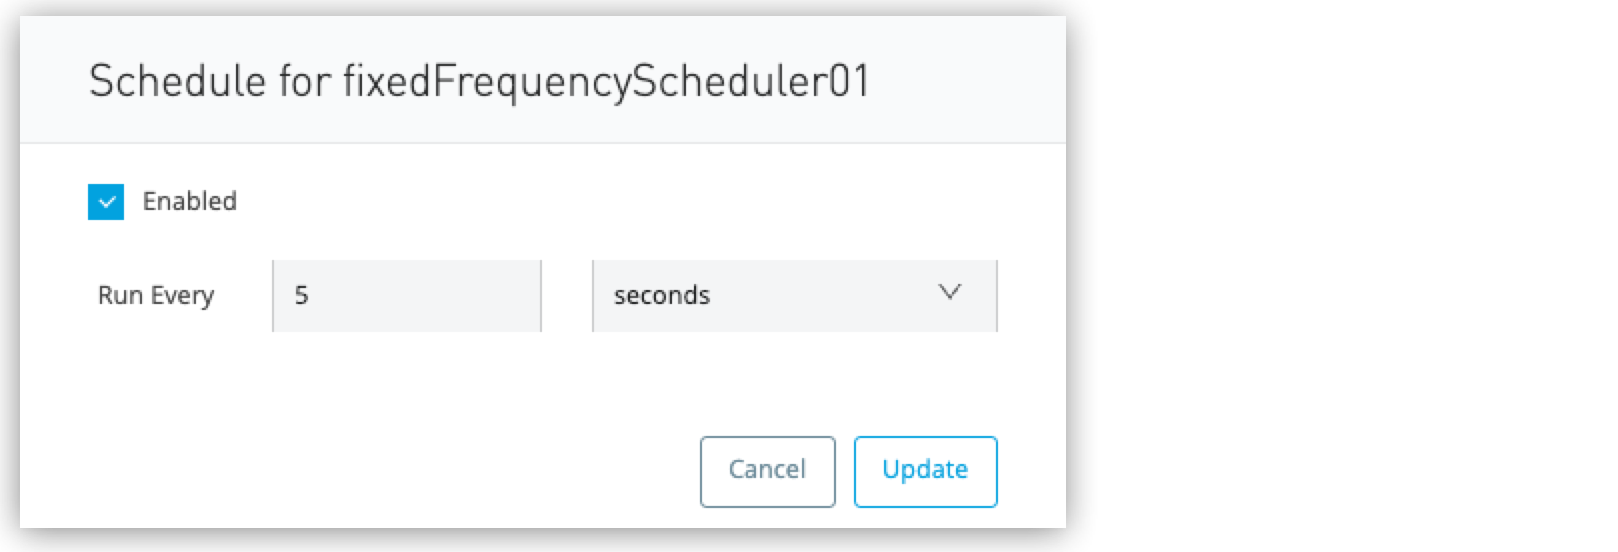 Fixed-frequency schedule configuration